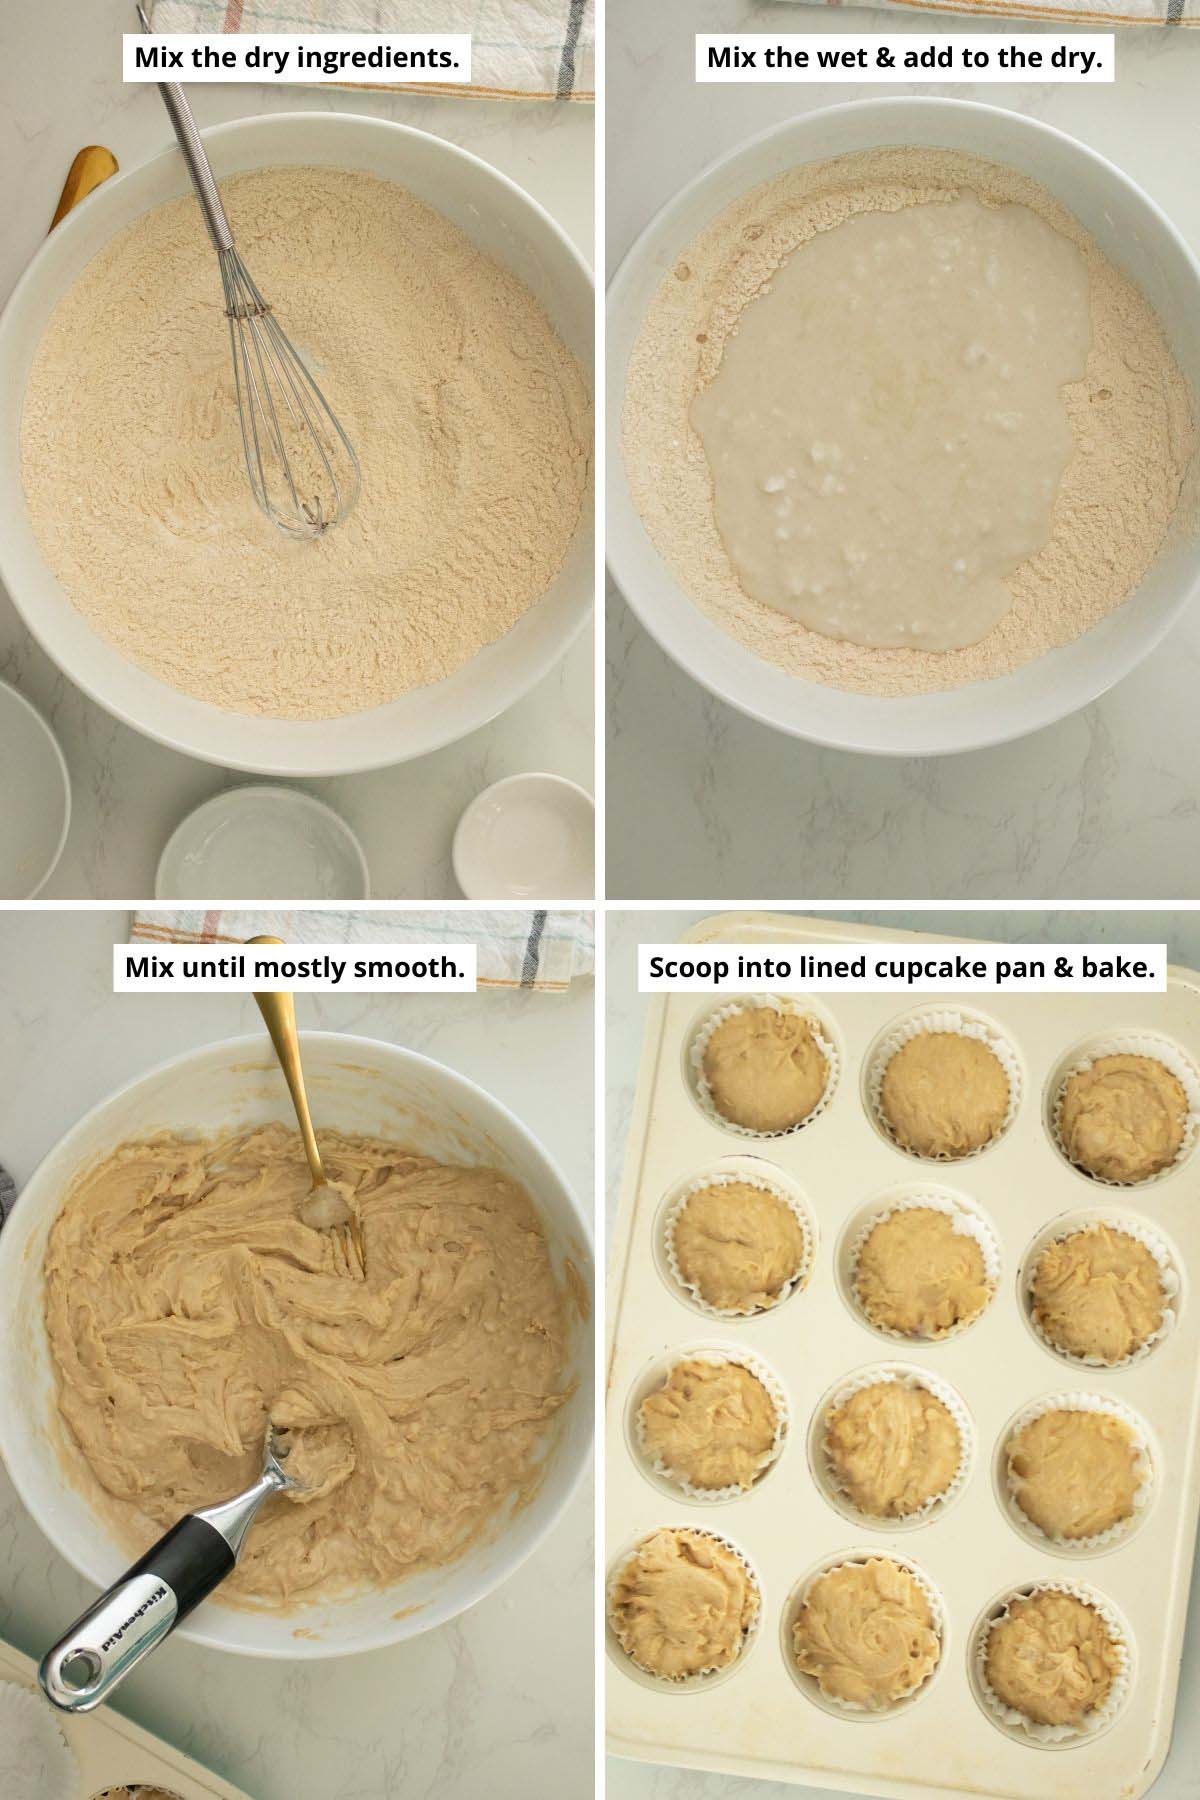 image collage showing the mixed dry ingredients, adding the mixed wet ingredients to the dry, the batter after mixing, and the batter in a lined cupcake pan